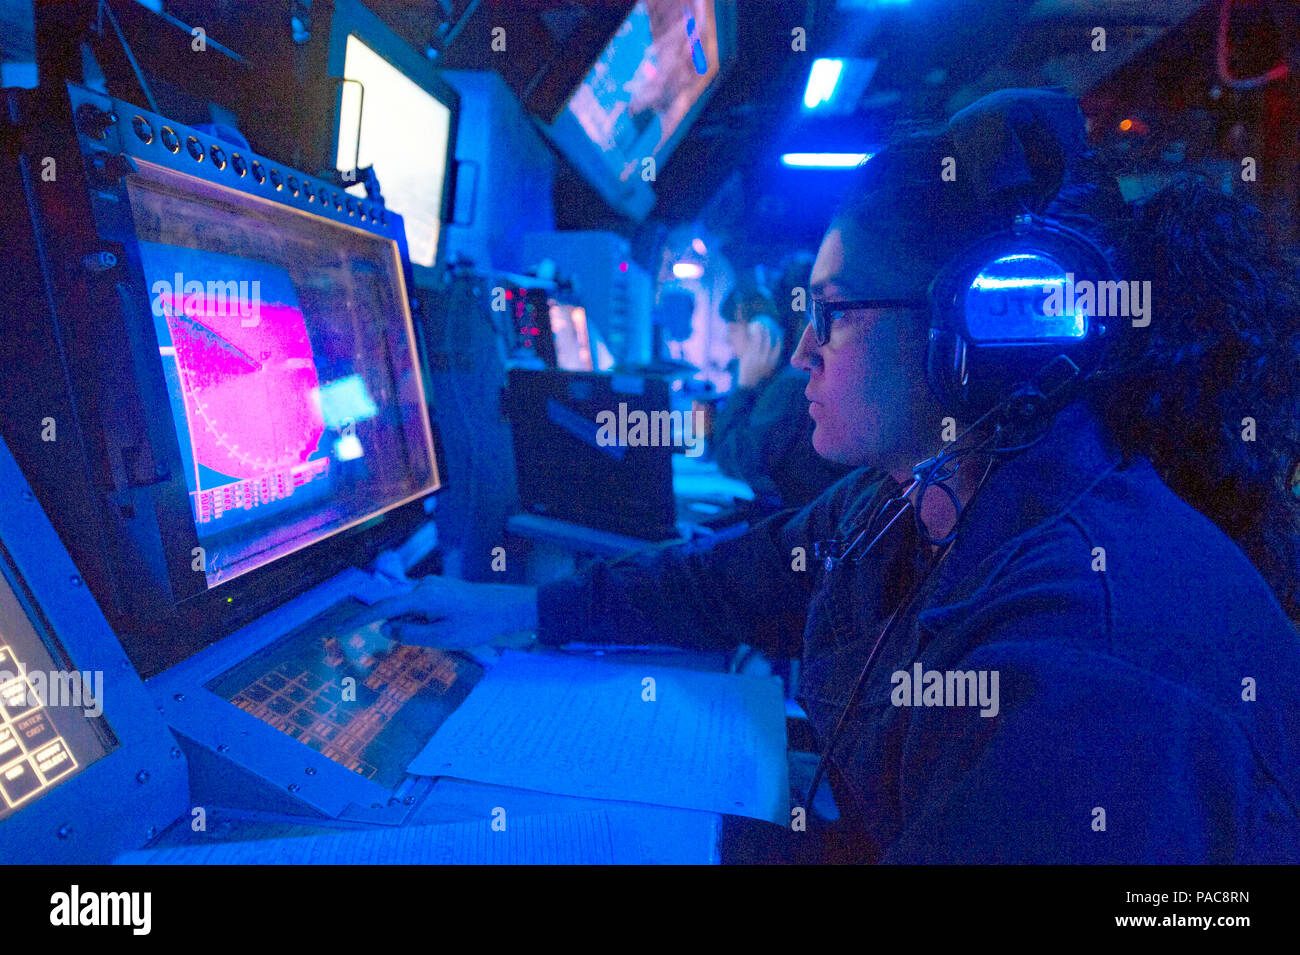 160308-N-MD297-001 PACIFIC OCEAN (March 8, 2016) - Operations Specialist Seaman Apprentice Amanda Parker stands watch in the combat information center (CIC) aboard the Arleigh Burke-class guided-missile destroyer USS Lassen (DDG 82). Lassen is deployed to the U.S. 4th Fleet area of responsibility supporting law enforcement operations as part of Operation Martillo. (U.S. Navy photo by Mass Communication Specialist 2nd Class Huey D. Younger Jr./Released) Stock Photo